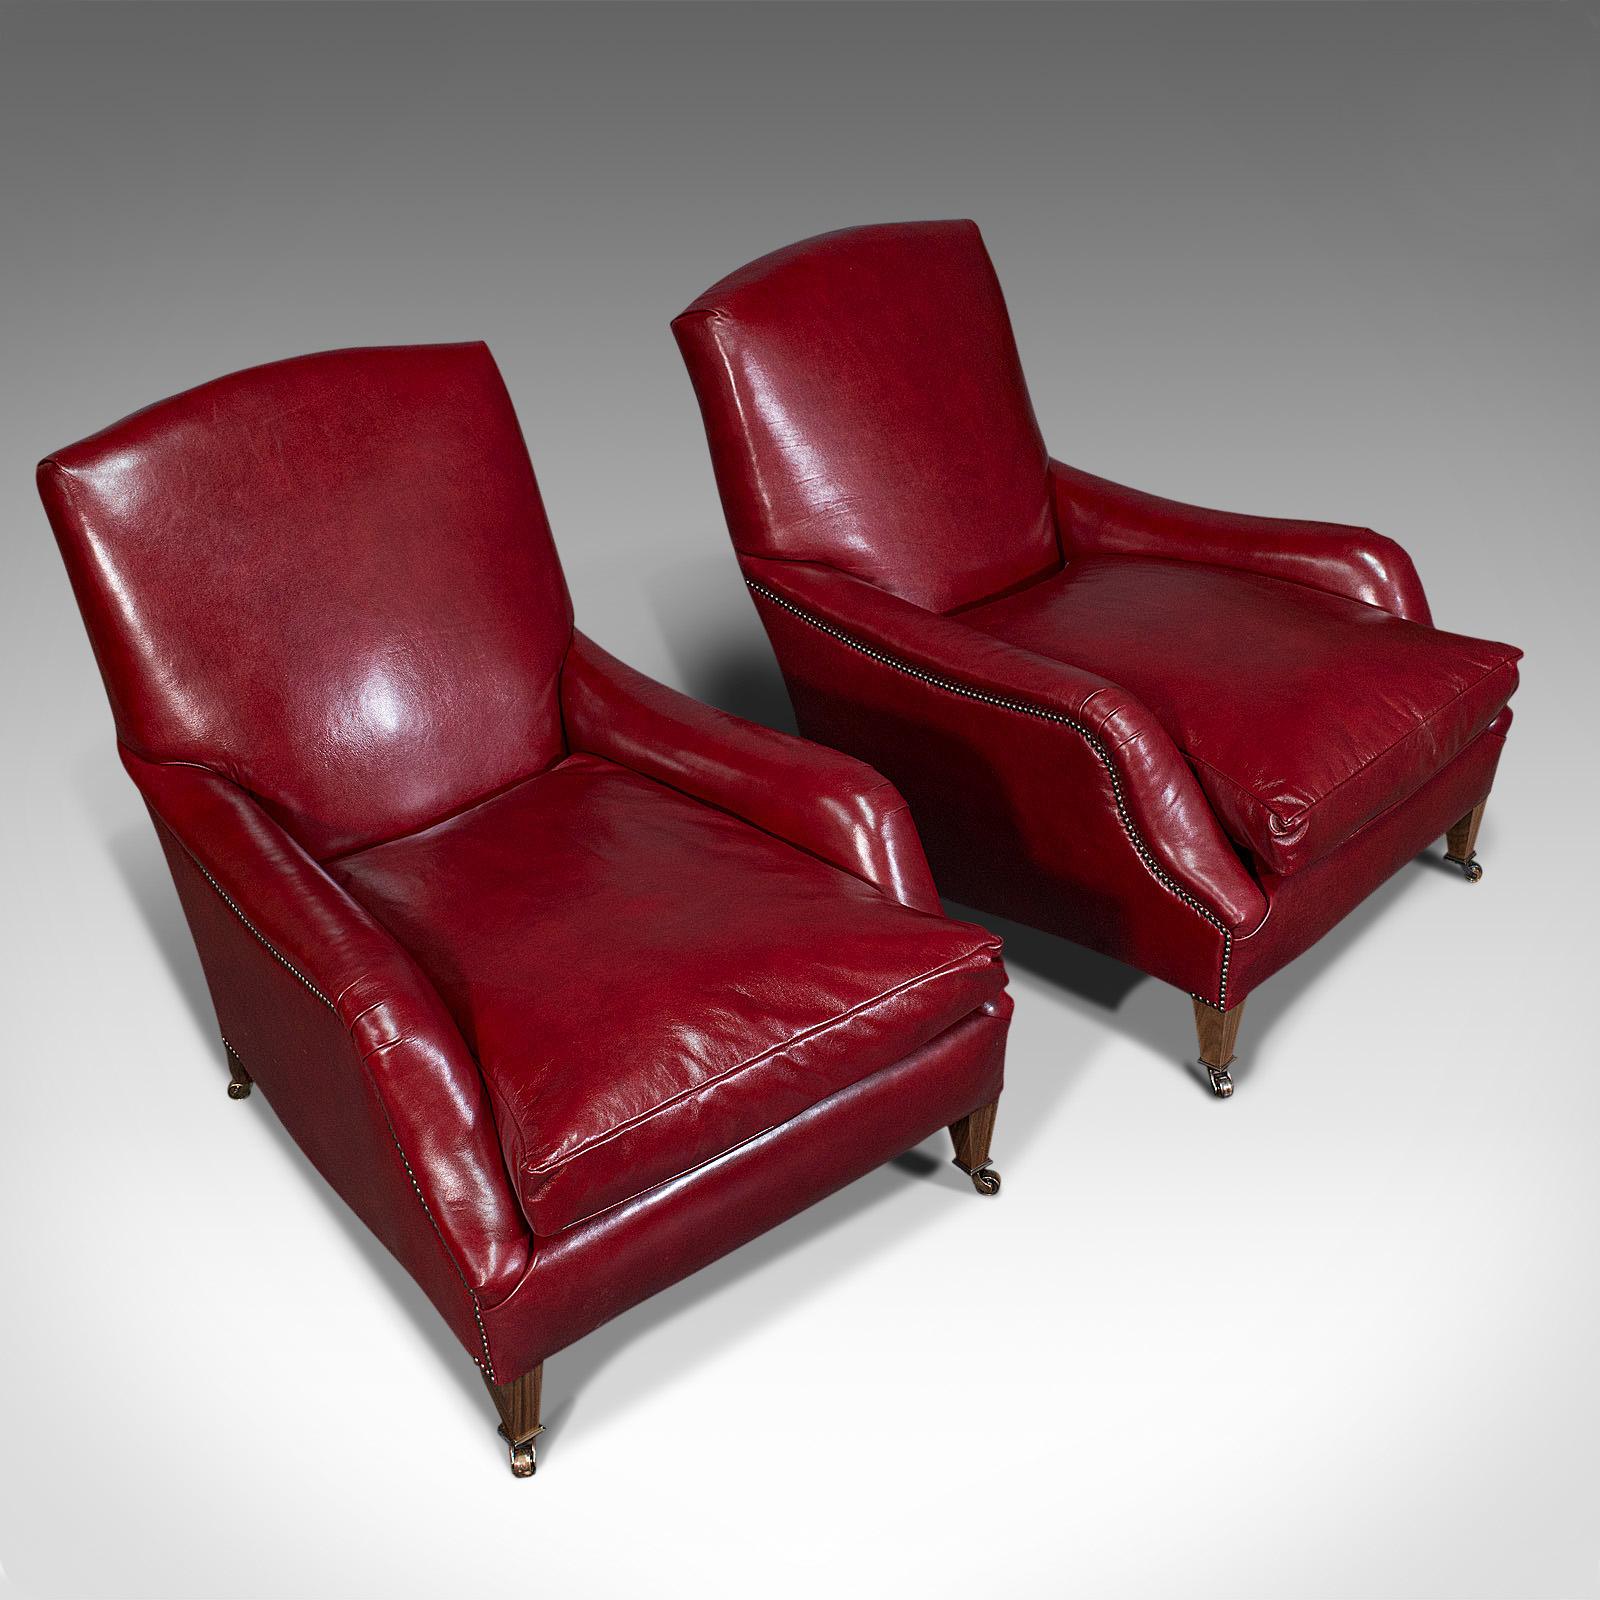 English Pair of Bespoke Leather, Club Armchairs, 'The Dutchman', Chairs by London Fine For Sale